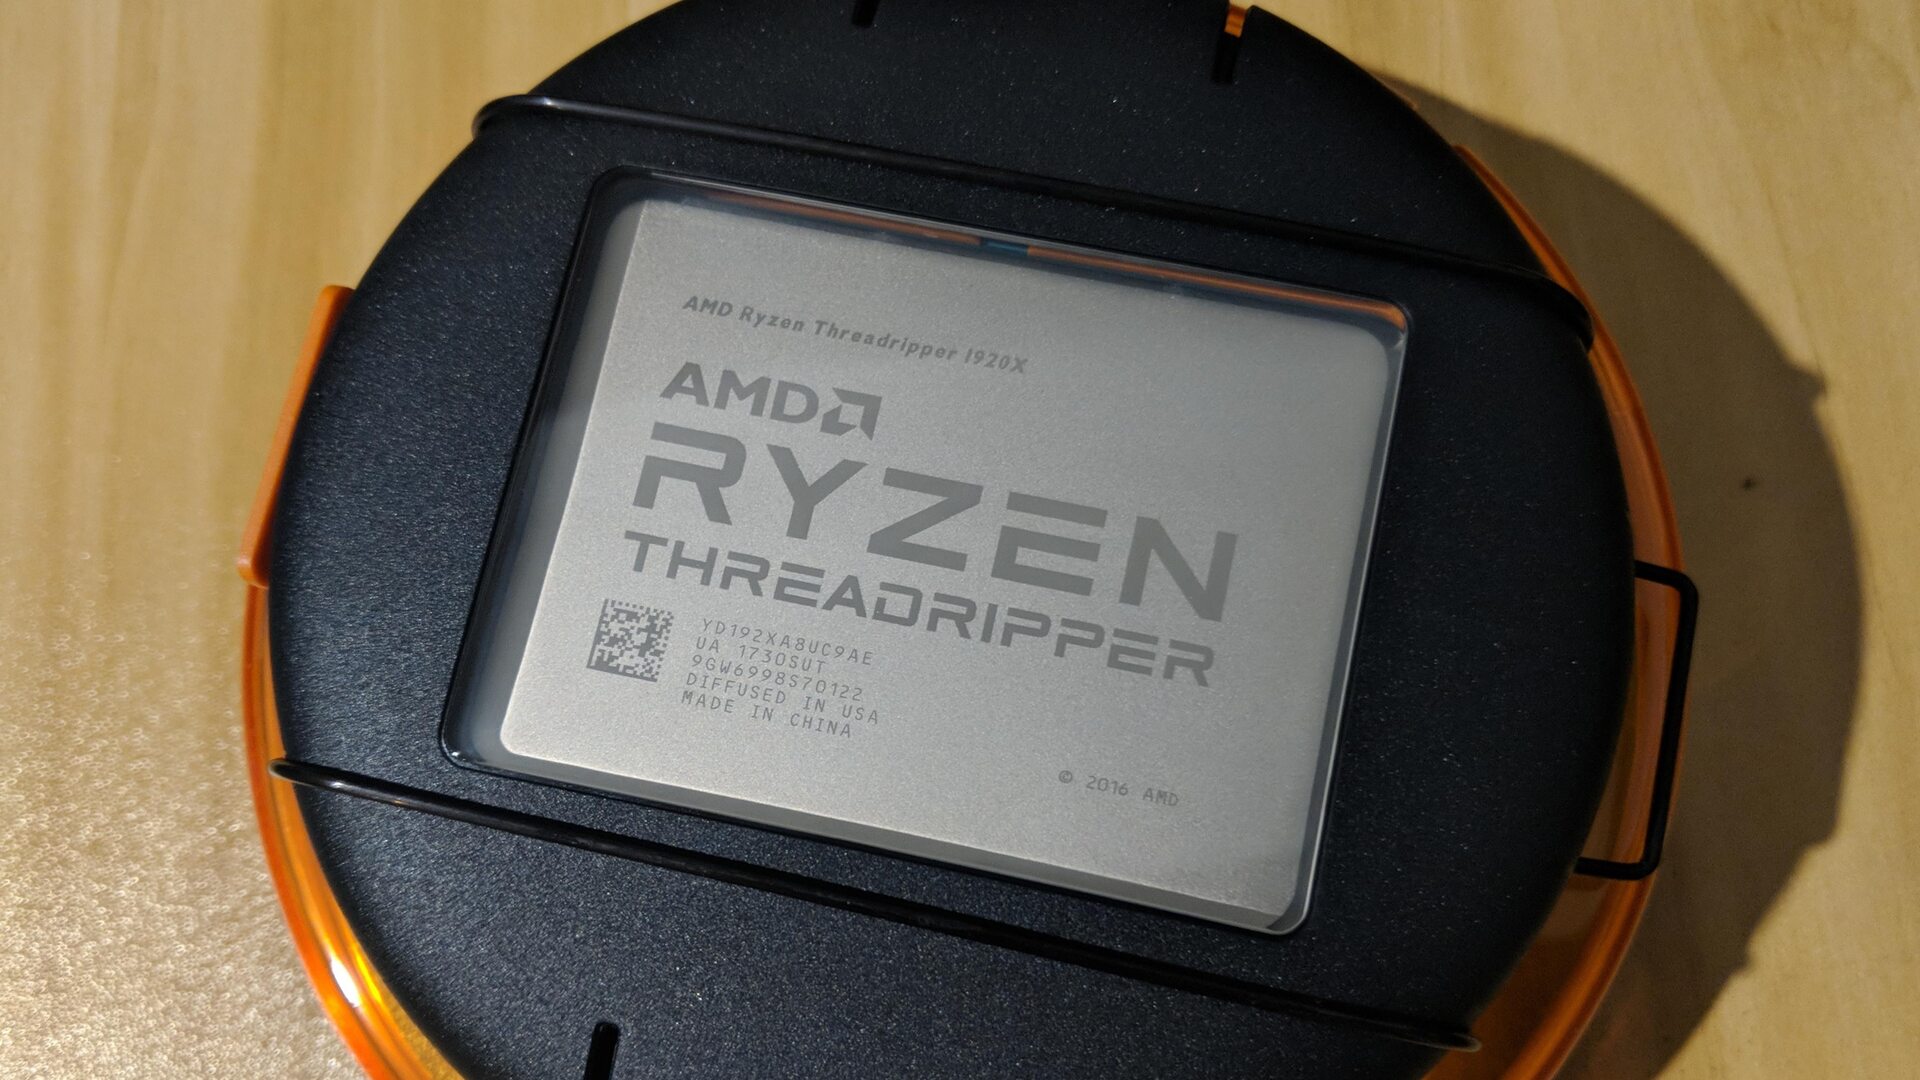 First generation Threadripper in its packaging.